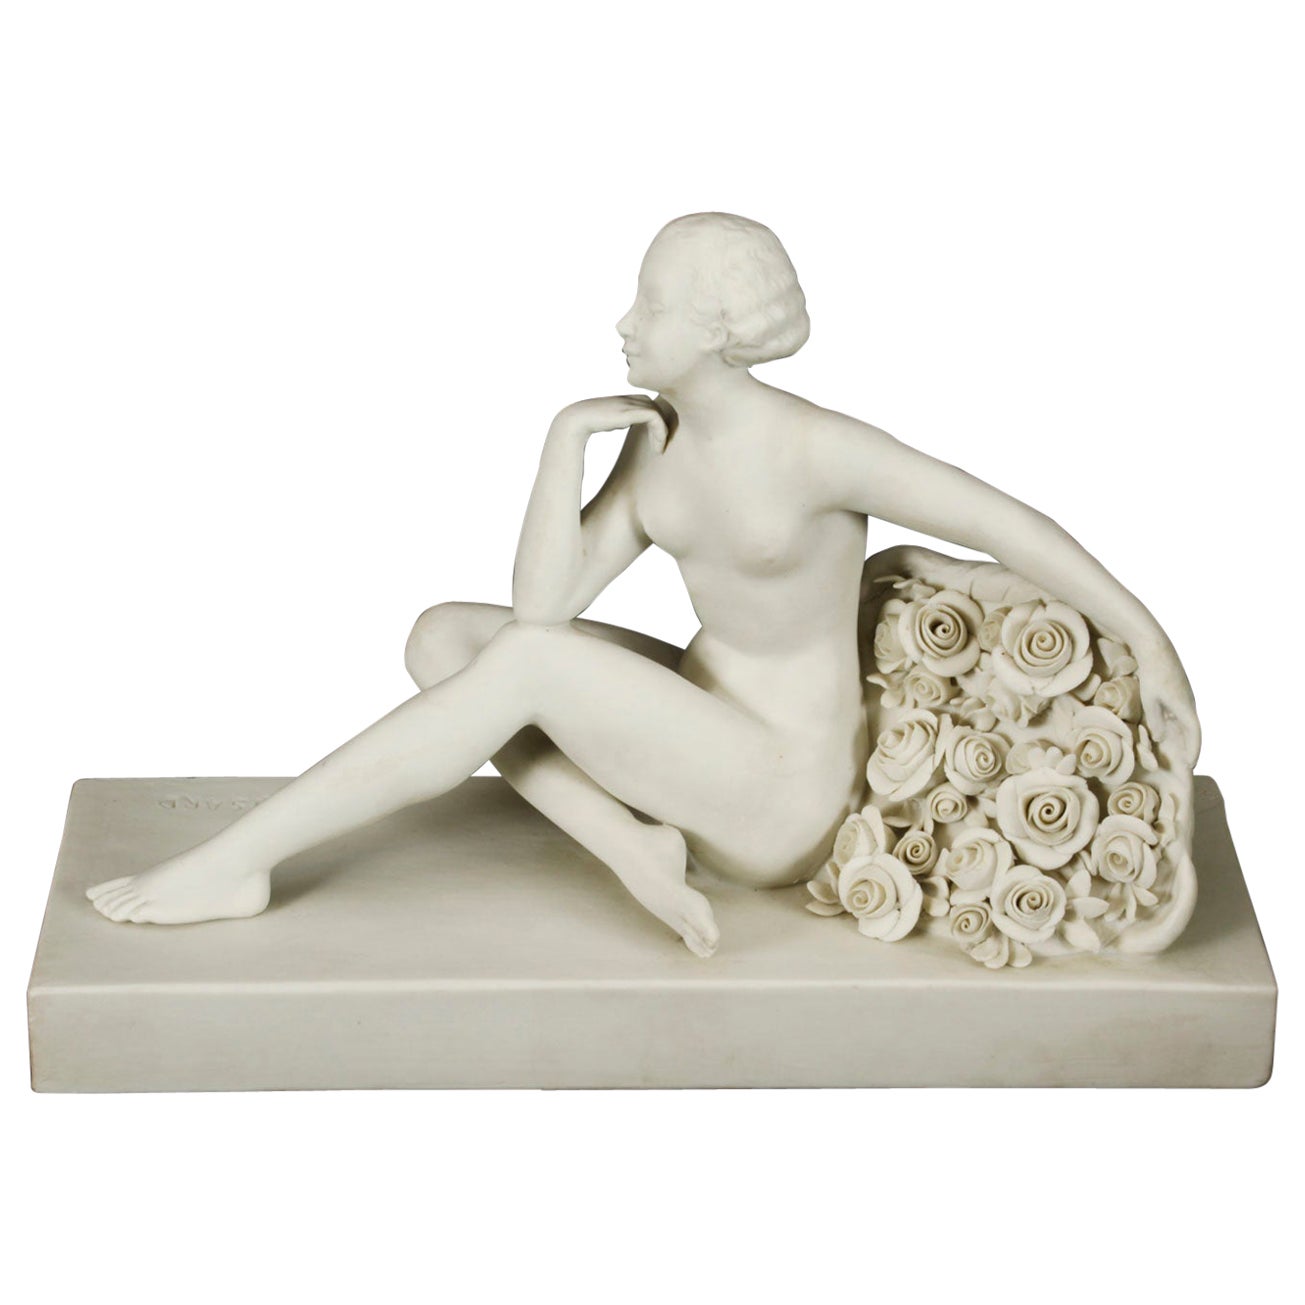 Antique Art Deco Bisque Porcelain Sculpture "Seated Nude With Flowers" 20th C